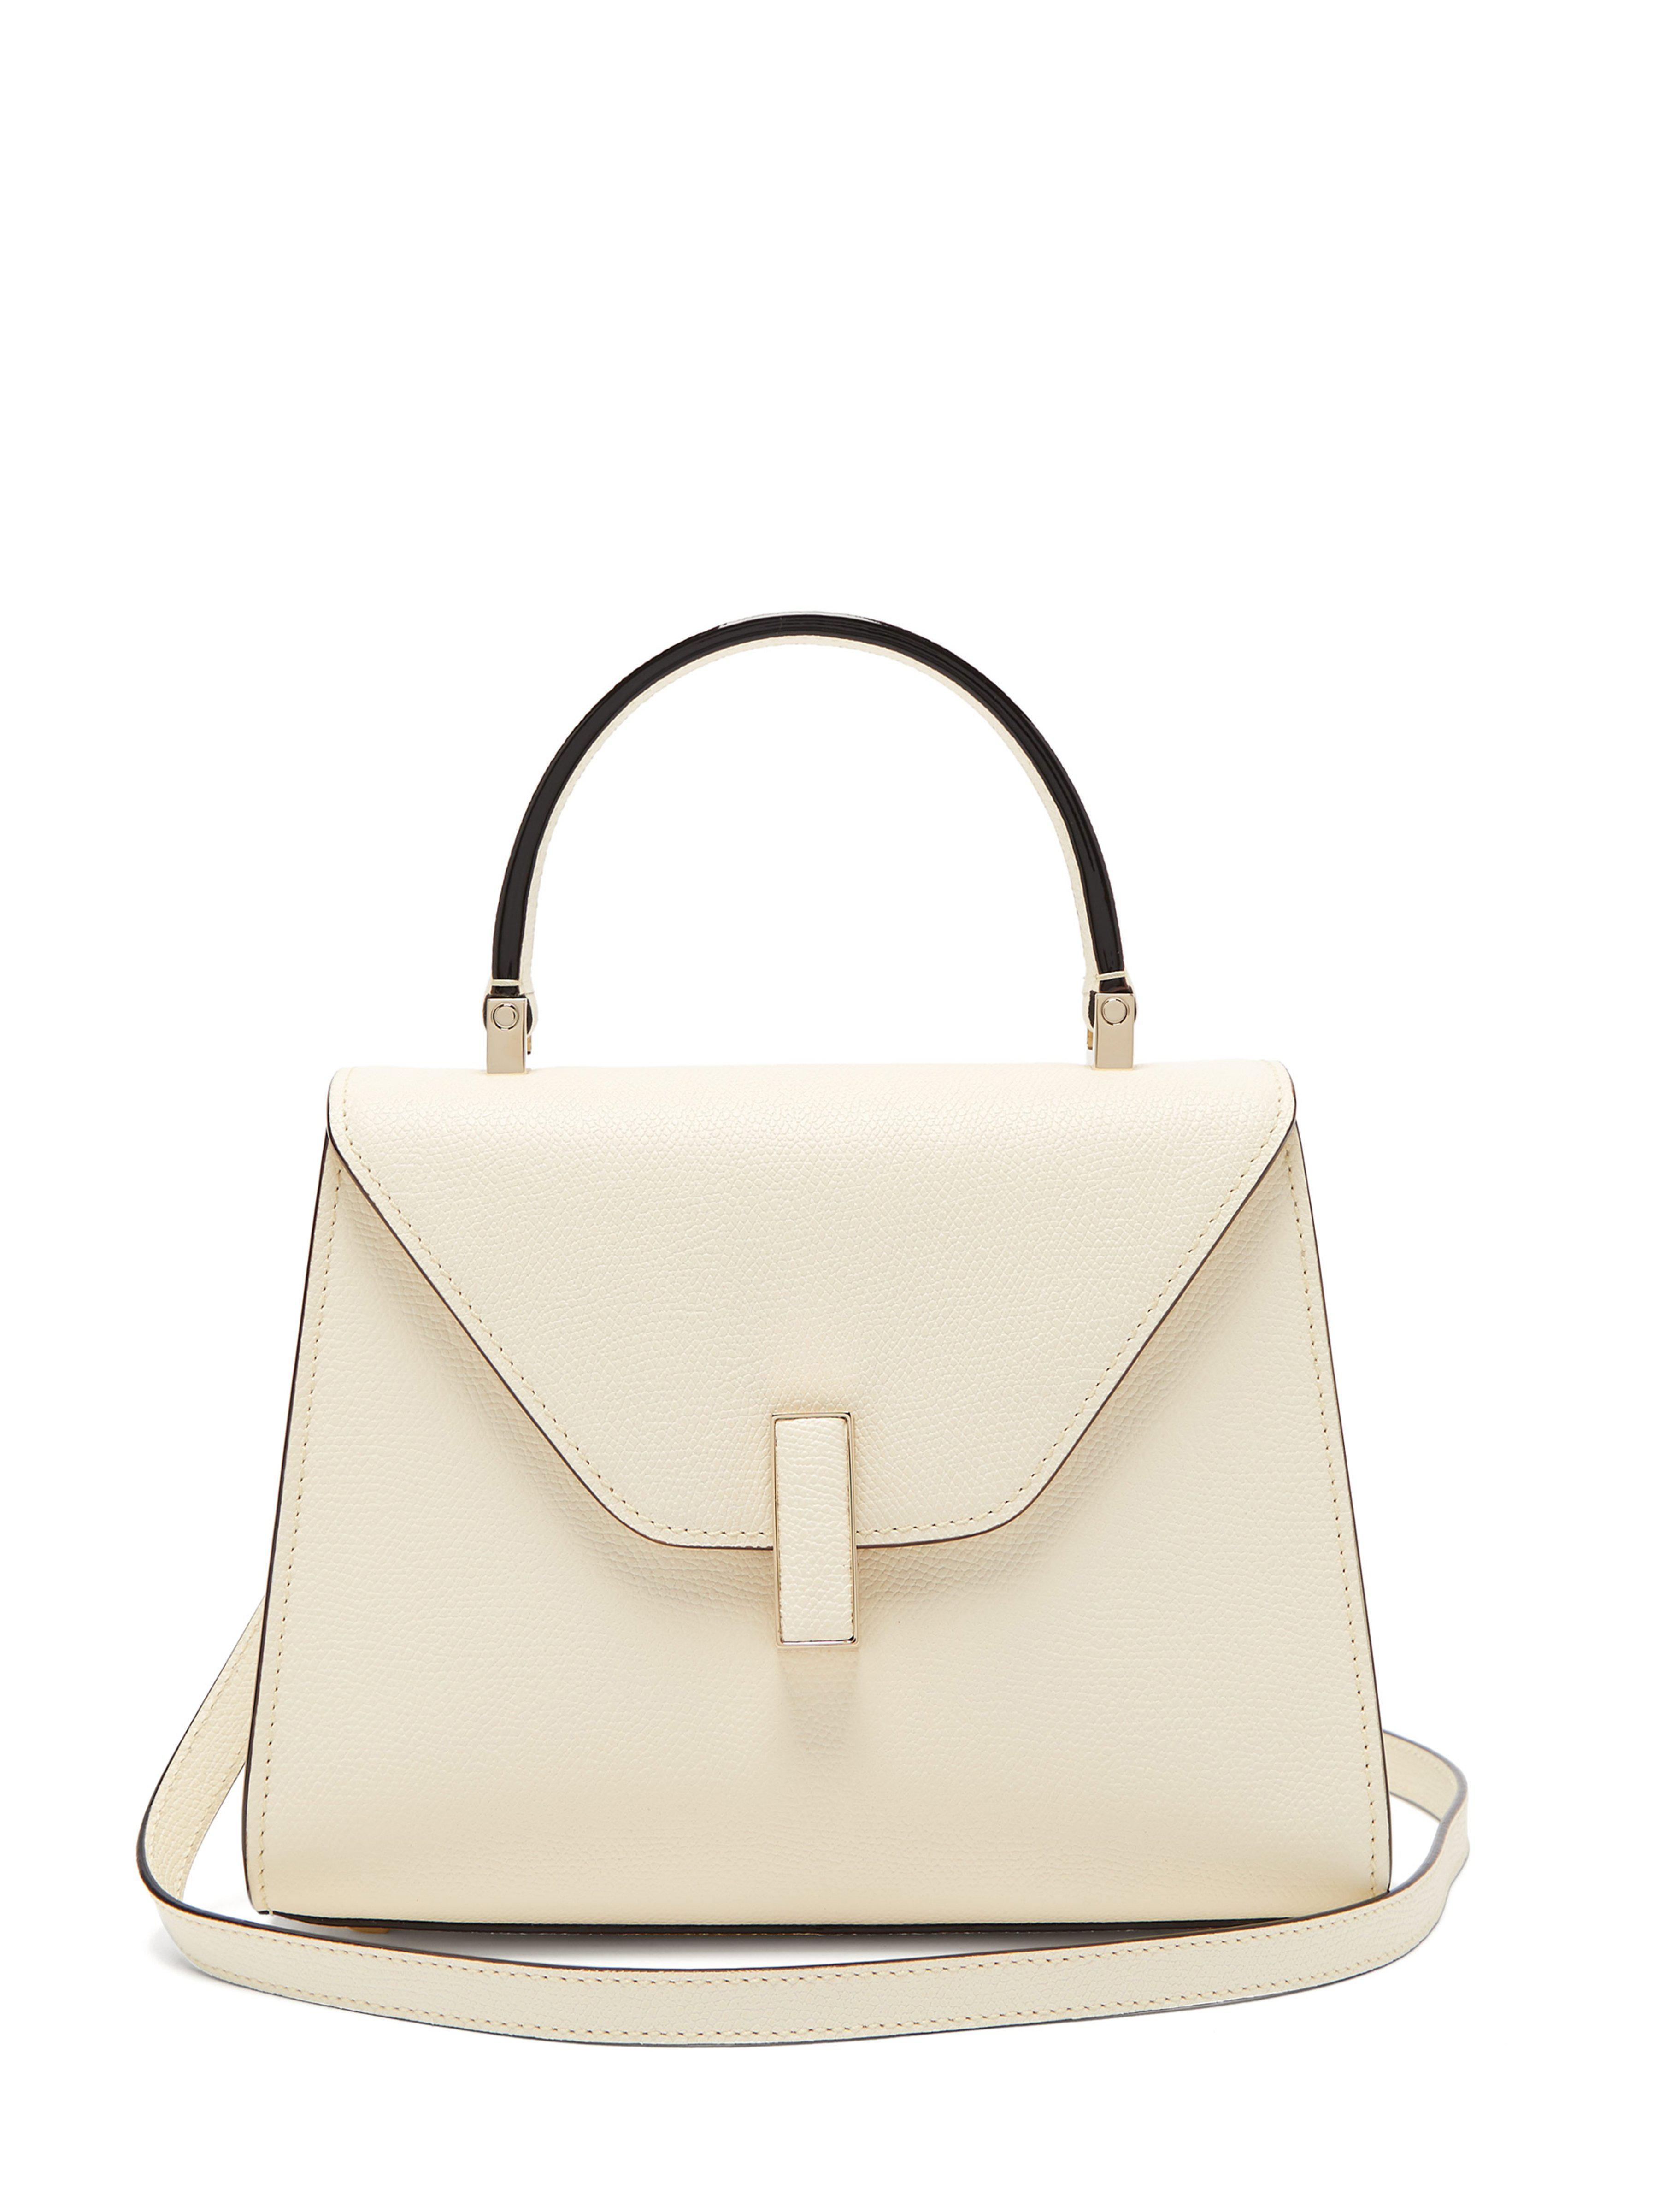 Valextra Iside Mini Leather Bag in White - Save 5% - Lyst